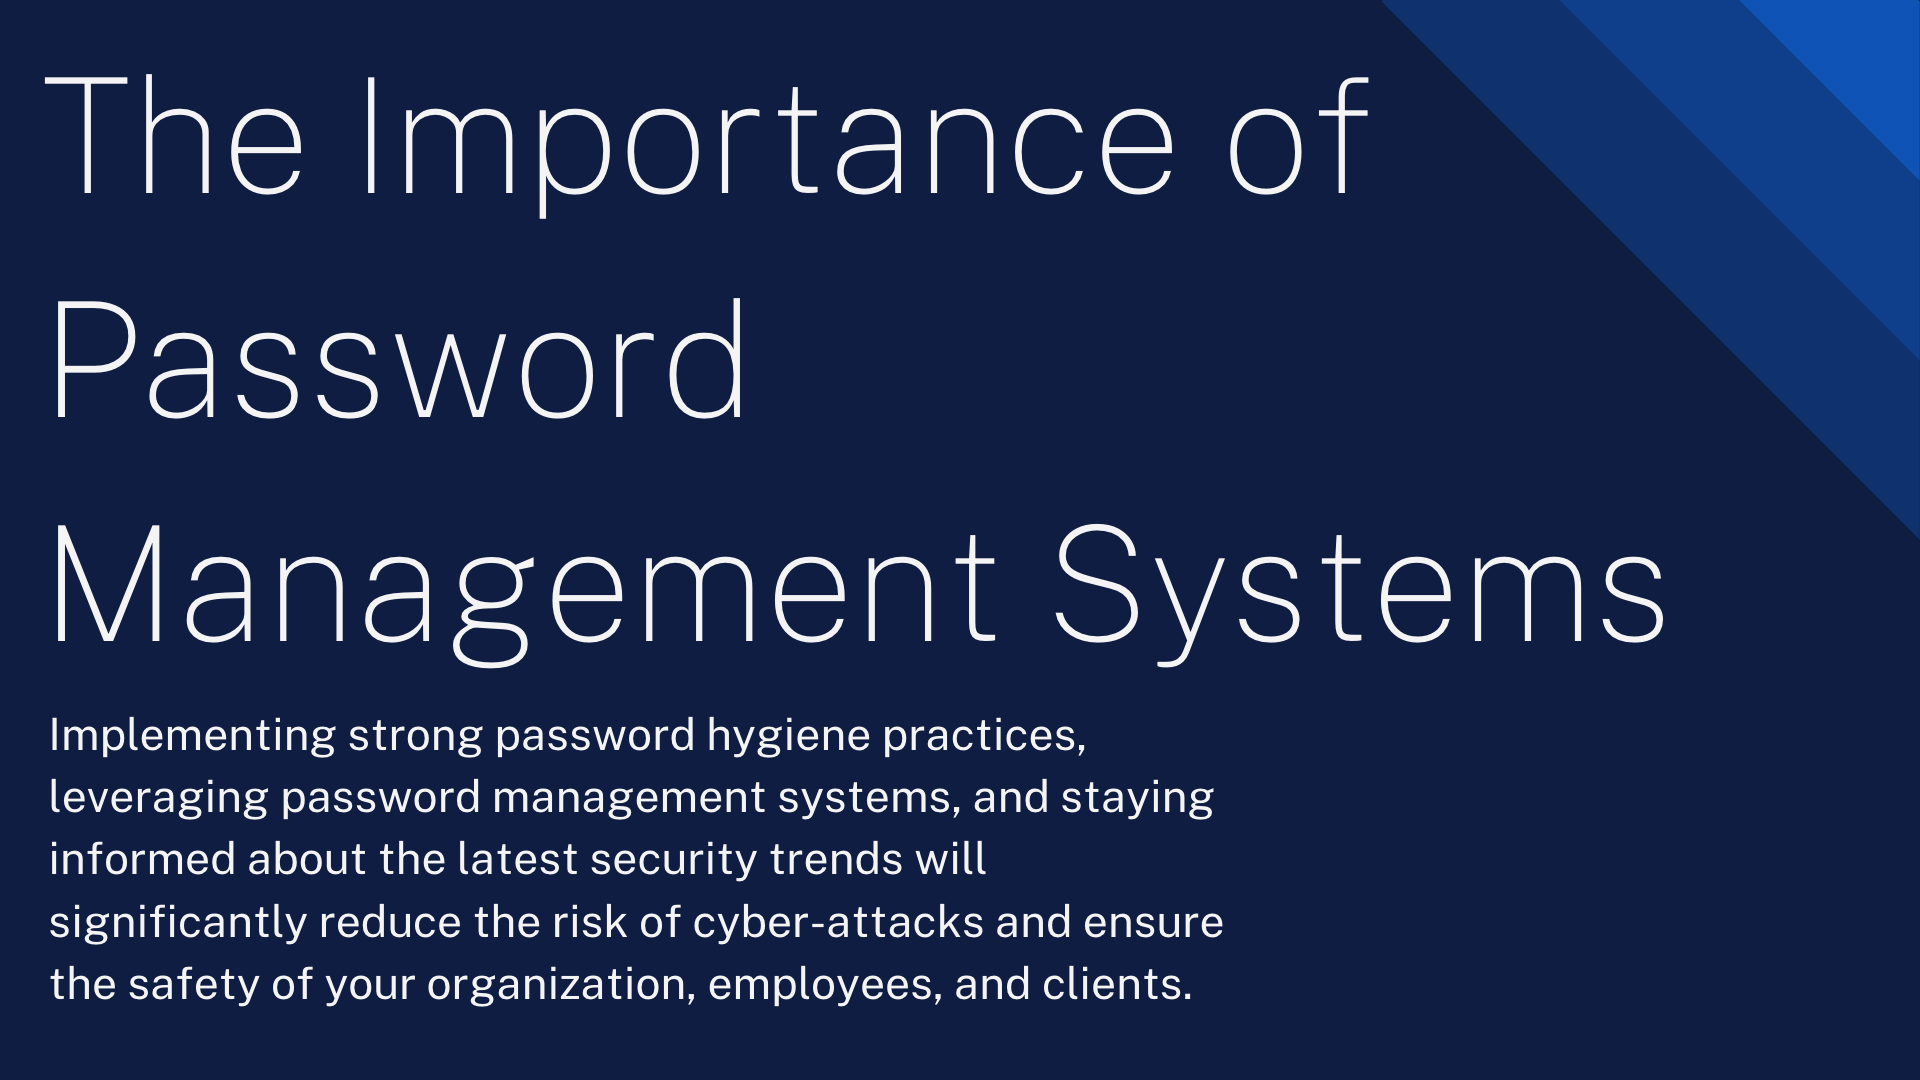 The Importance of Password Management Systems